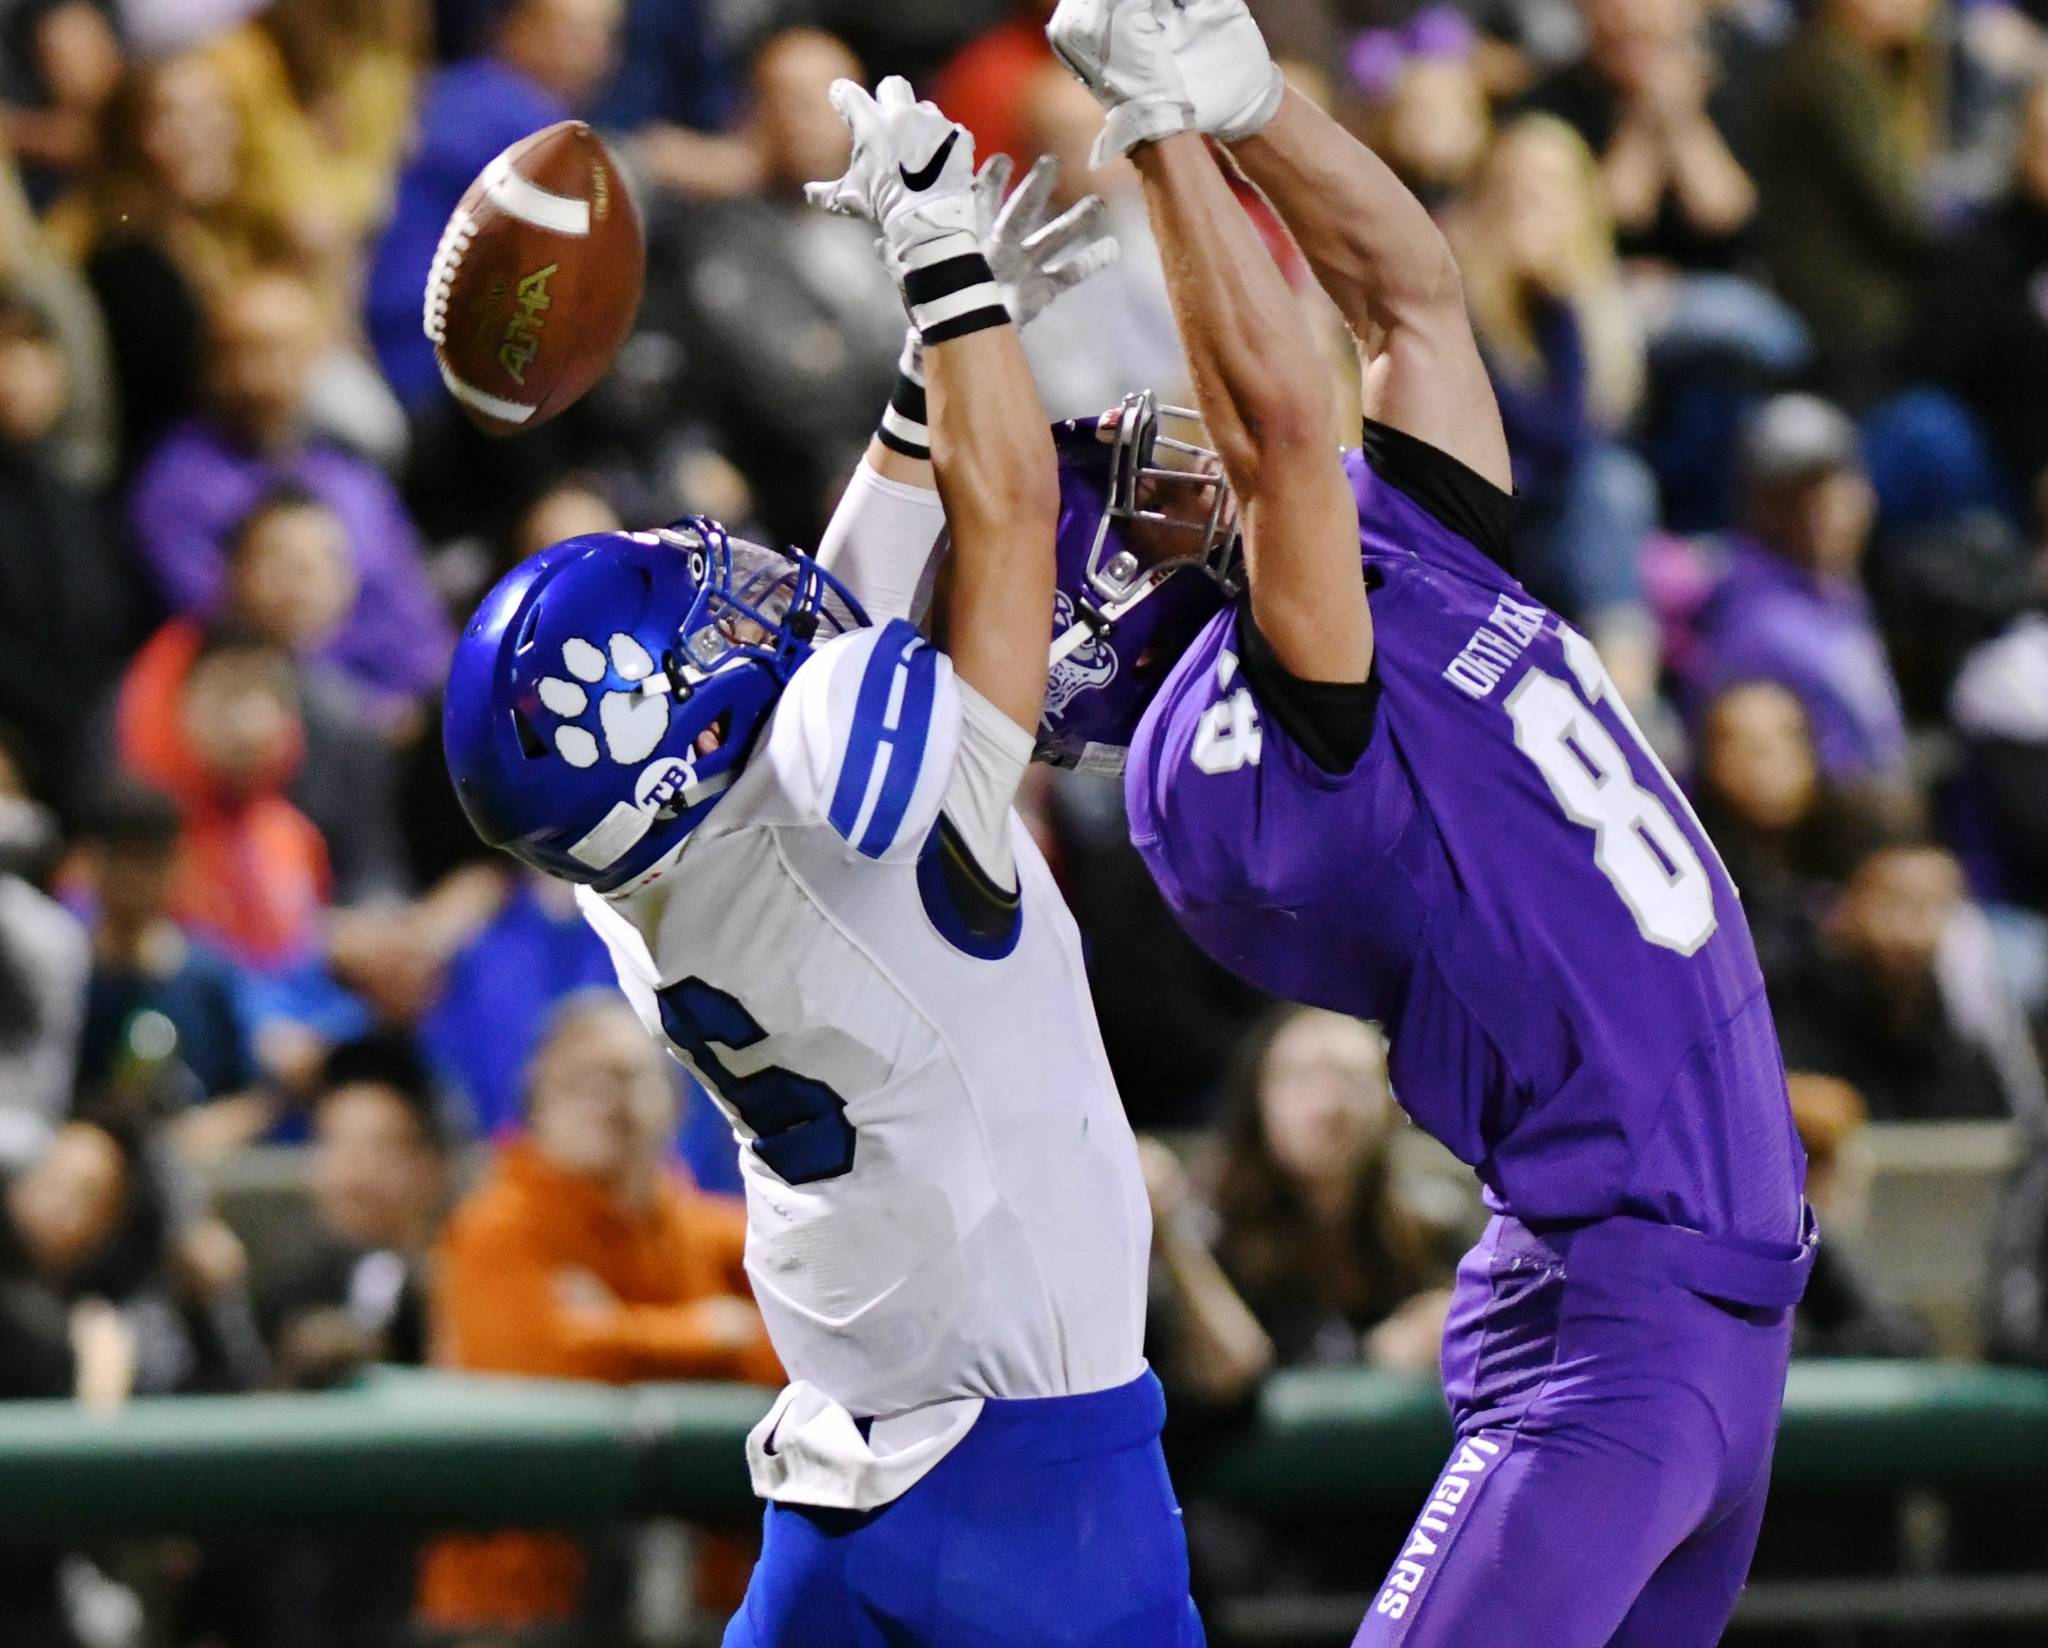 Bothell rolls past North Creek in rivalry football matchup